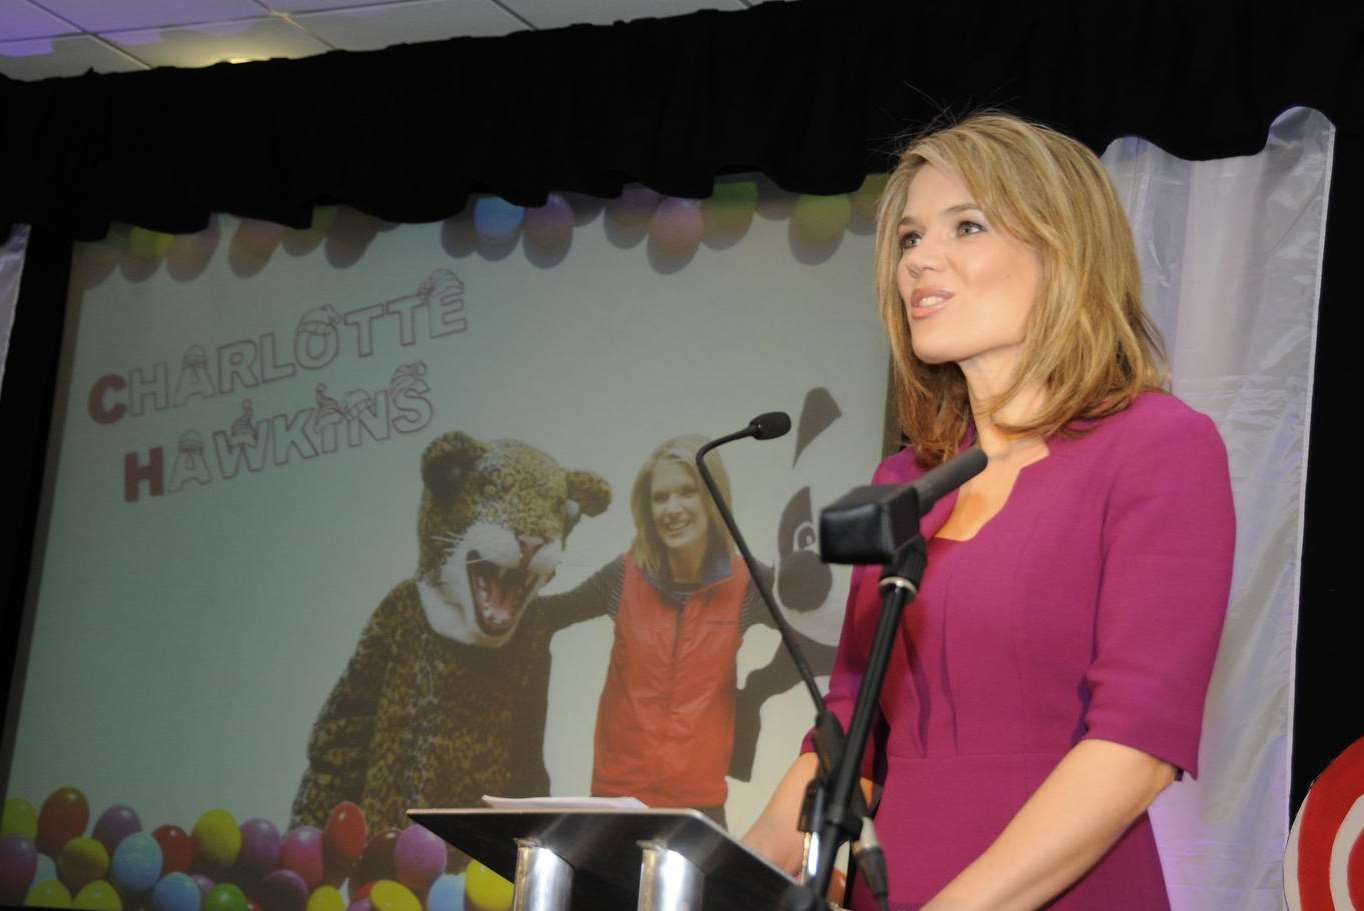 Good Morning Britain presenter Charlotte Hawkins hosted last year's ceremony